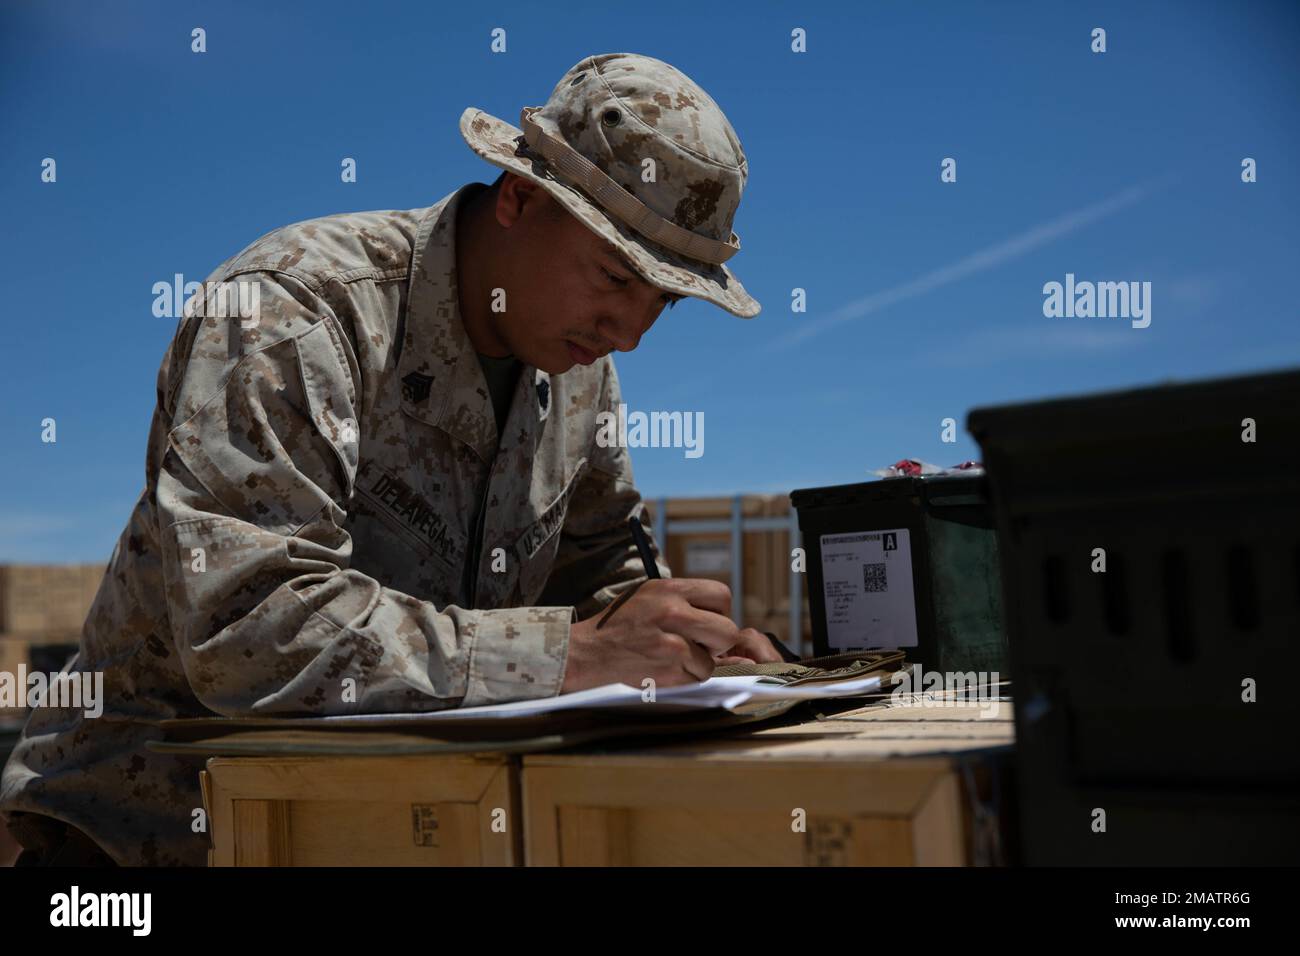 U.S. Marine Corps Sgt. Glenn Delavega, an ammunition technician with Combat Logistics Battalion 13, 13th Marine Expeditionary Unit, inspects and verifies ammunition in preparation for an upcoming range during Realistic Urban Training exercise at Marine Corp Air Ground Combat Center Twentynine Palms on June 4, 2022. The 13th MEU is currently conducting RUT exercise to enhance the integration and collective capability of the MEU’s command, air, ground, and logistics elements and prepare the 13th MEU to meet the nation’s crisis response needs during their upcoming overseas deployment. Stock Photo